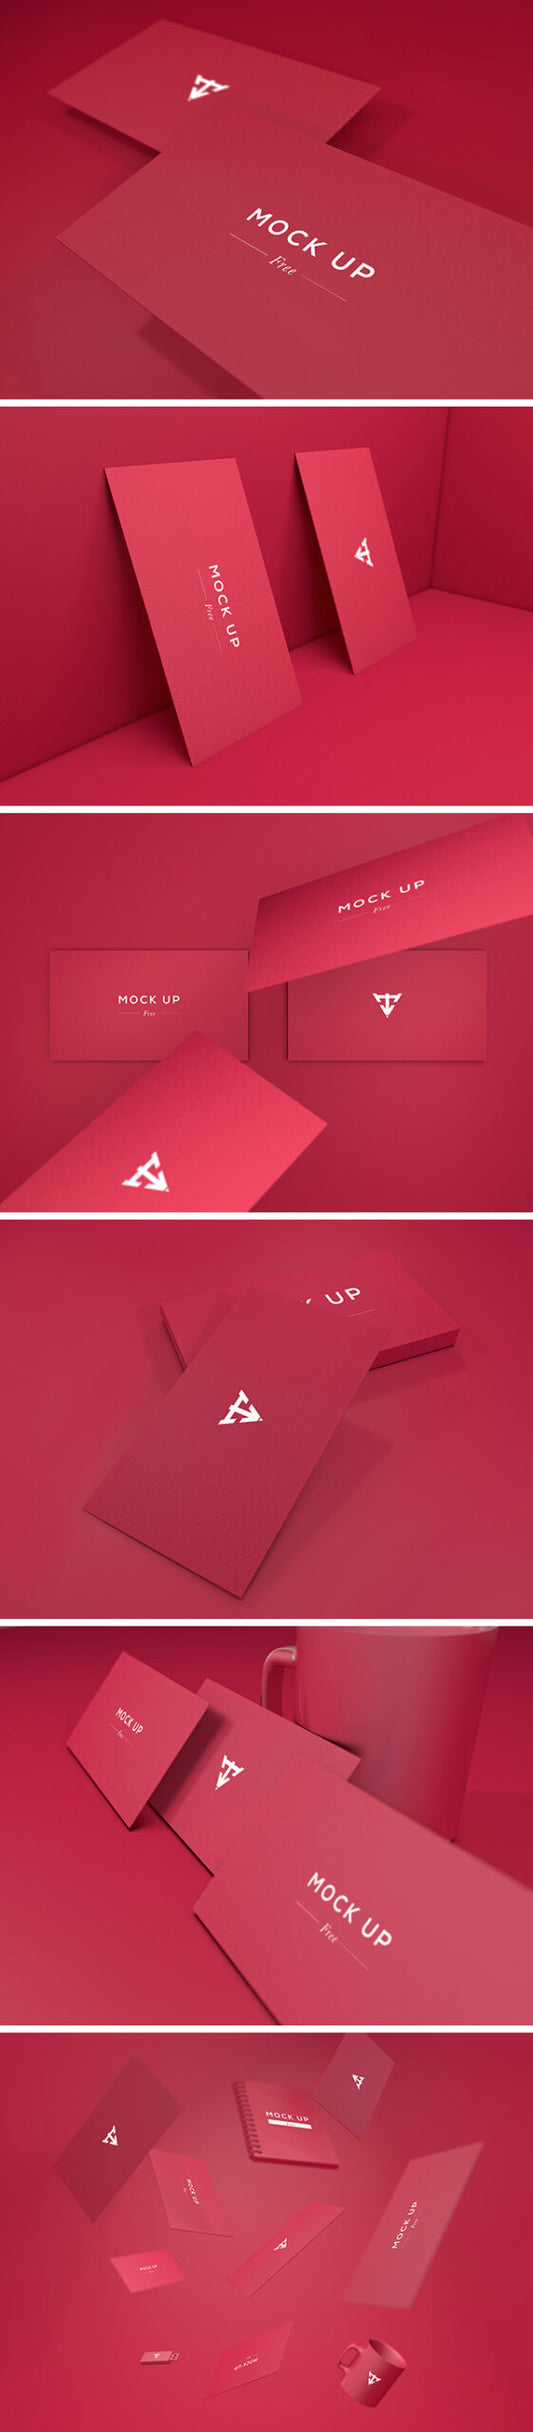 Free 6 Business Cards Mockup